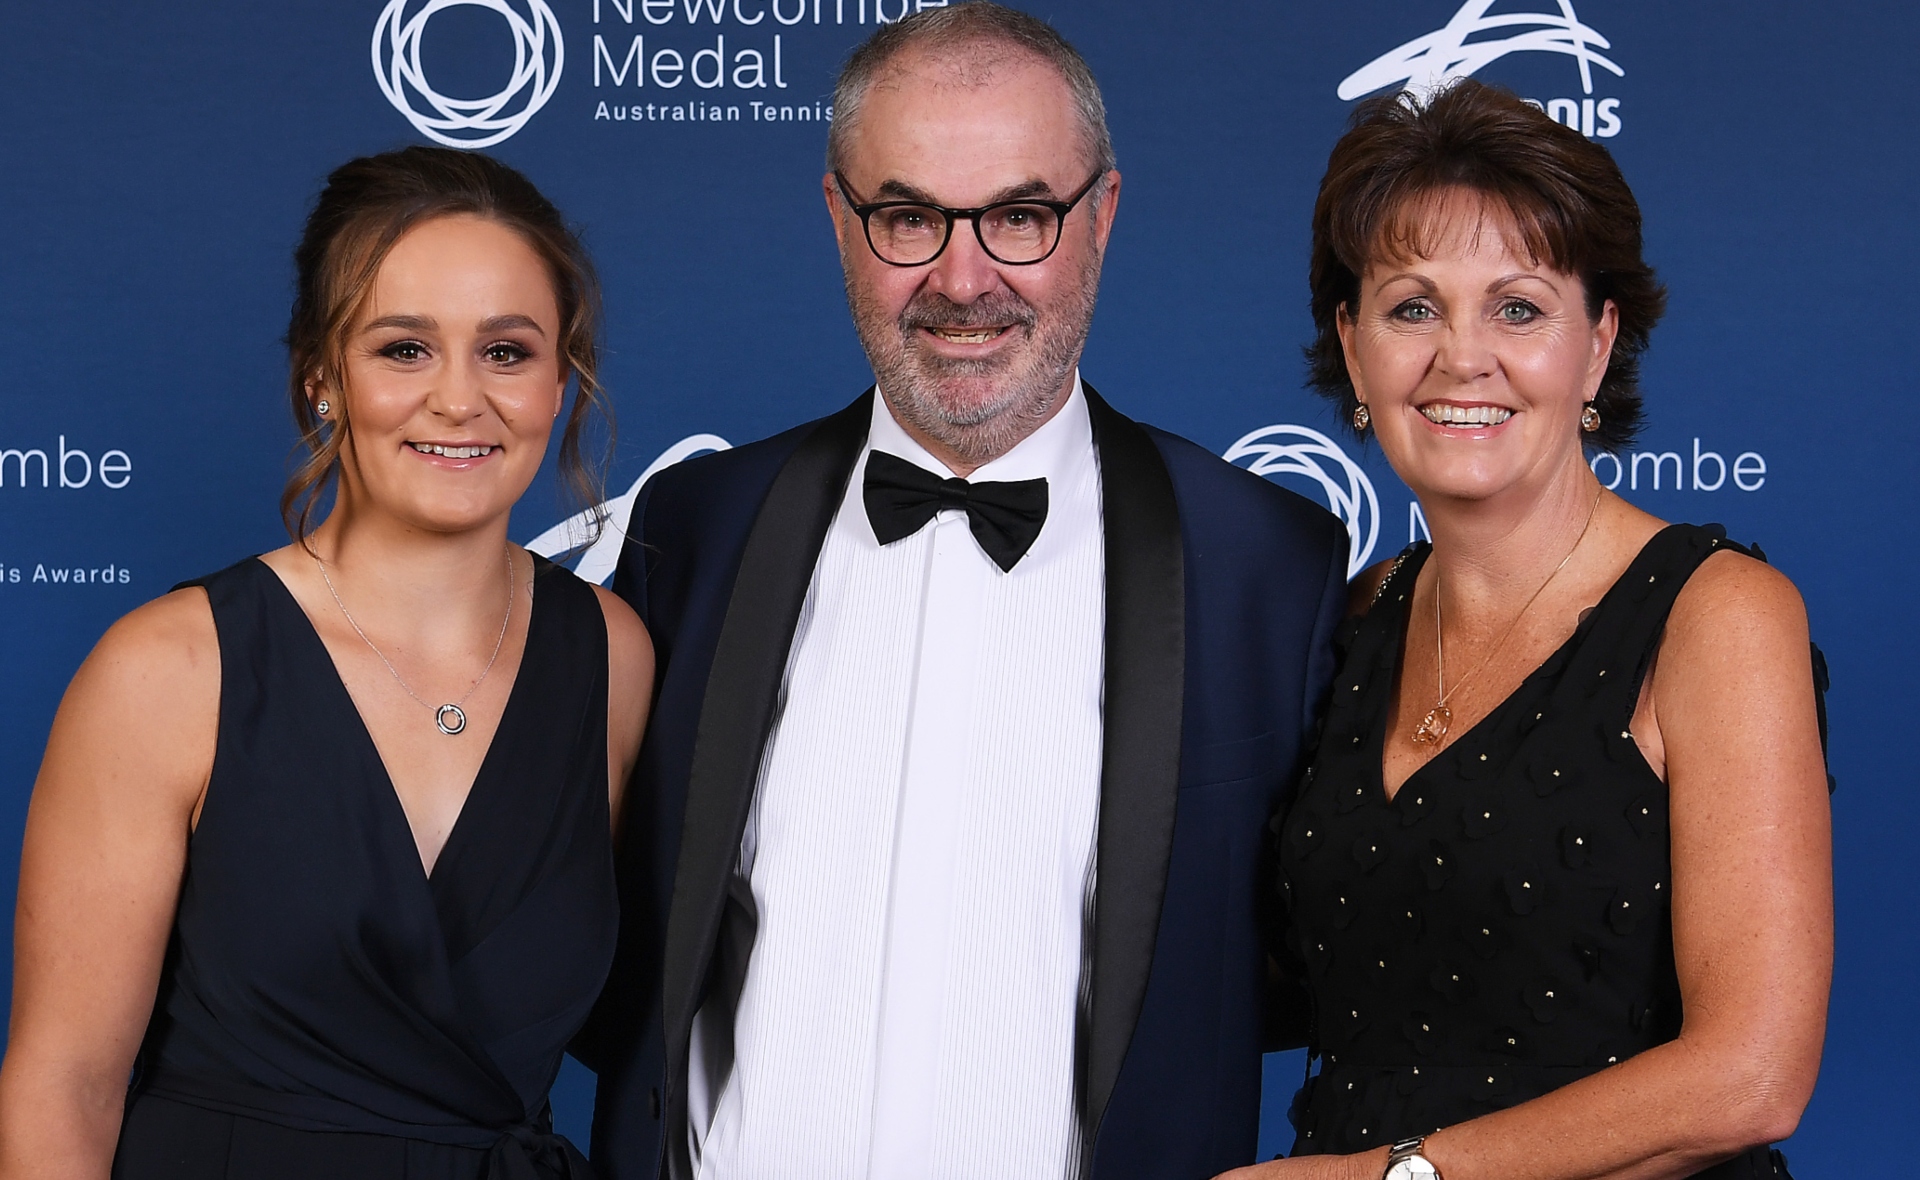 Meet Tennis Legend Ash Barty’s Day One Supporters, The Barty Family